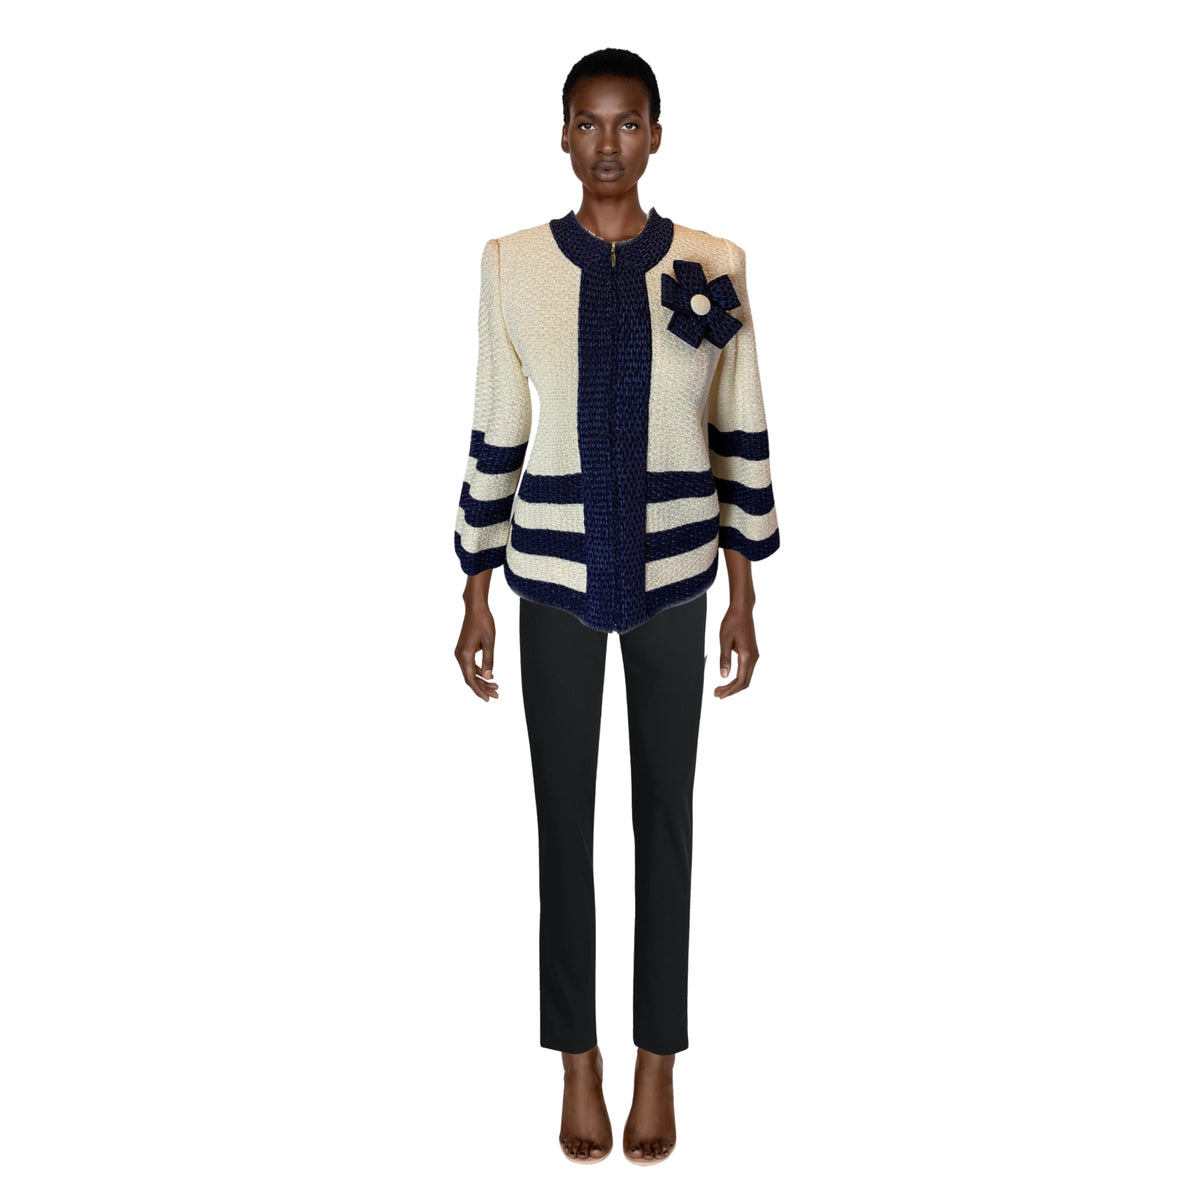 ST. JOHN Cream and Navy Stripe Jacket with Flower Detail | Size US 4